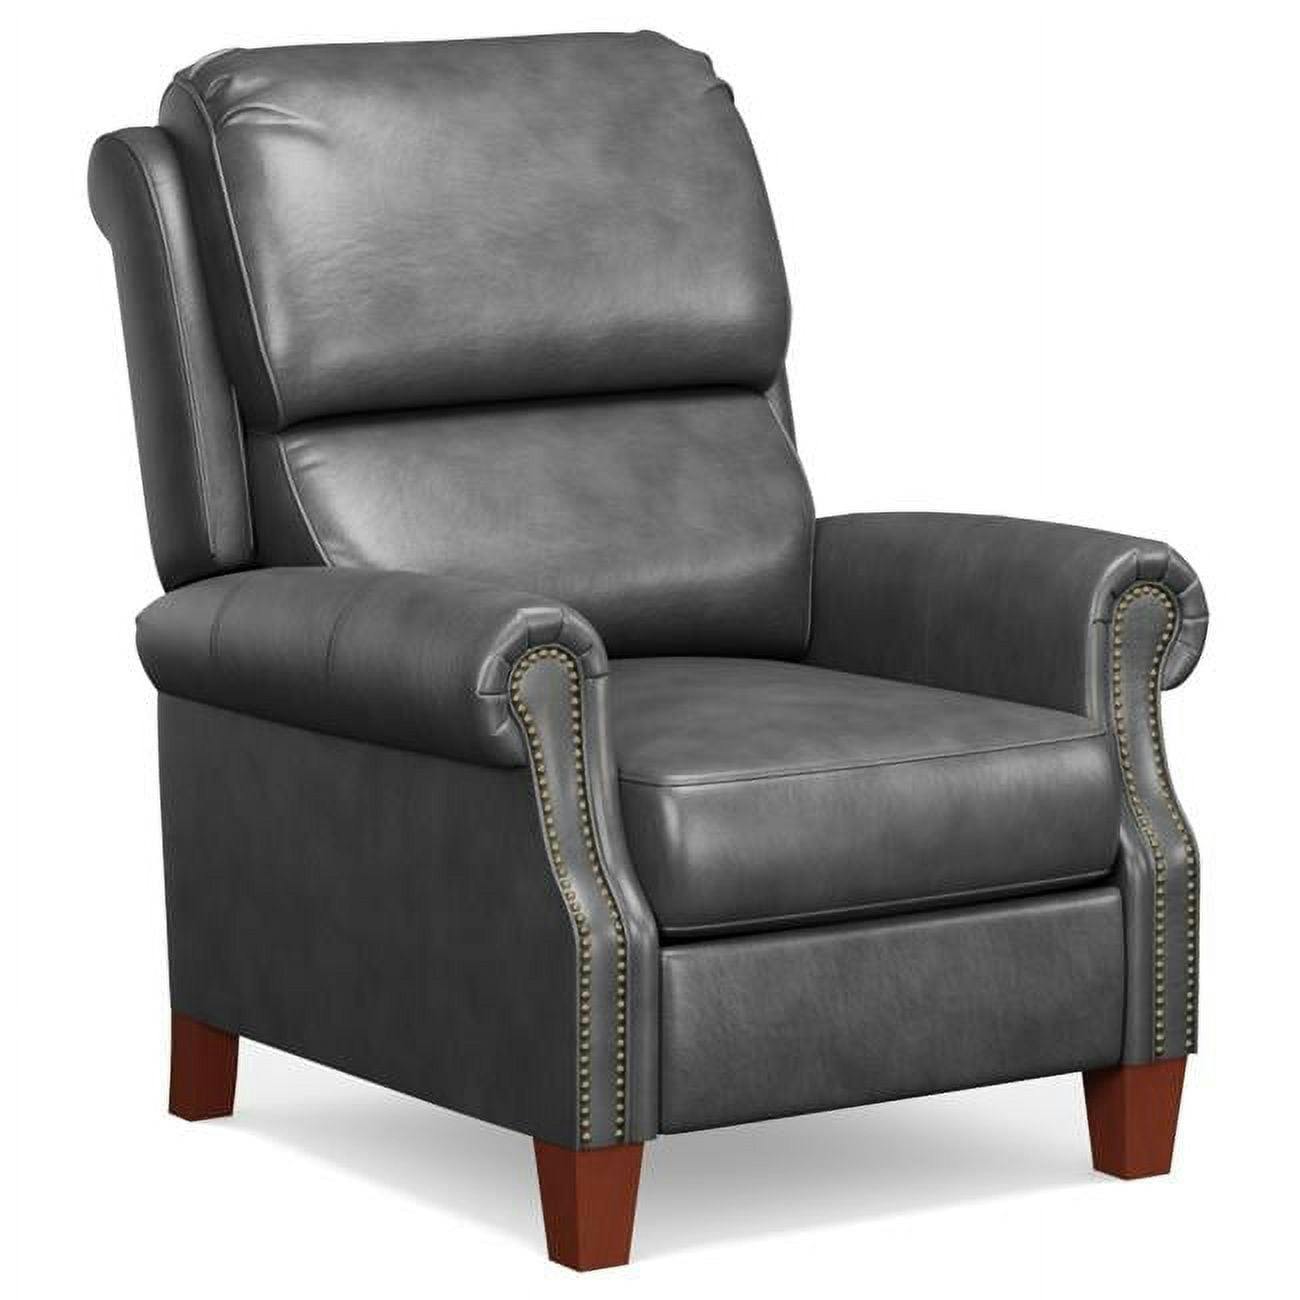 Traditional Dark Gray Leather Pushback Recliner Chair